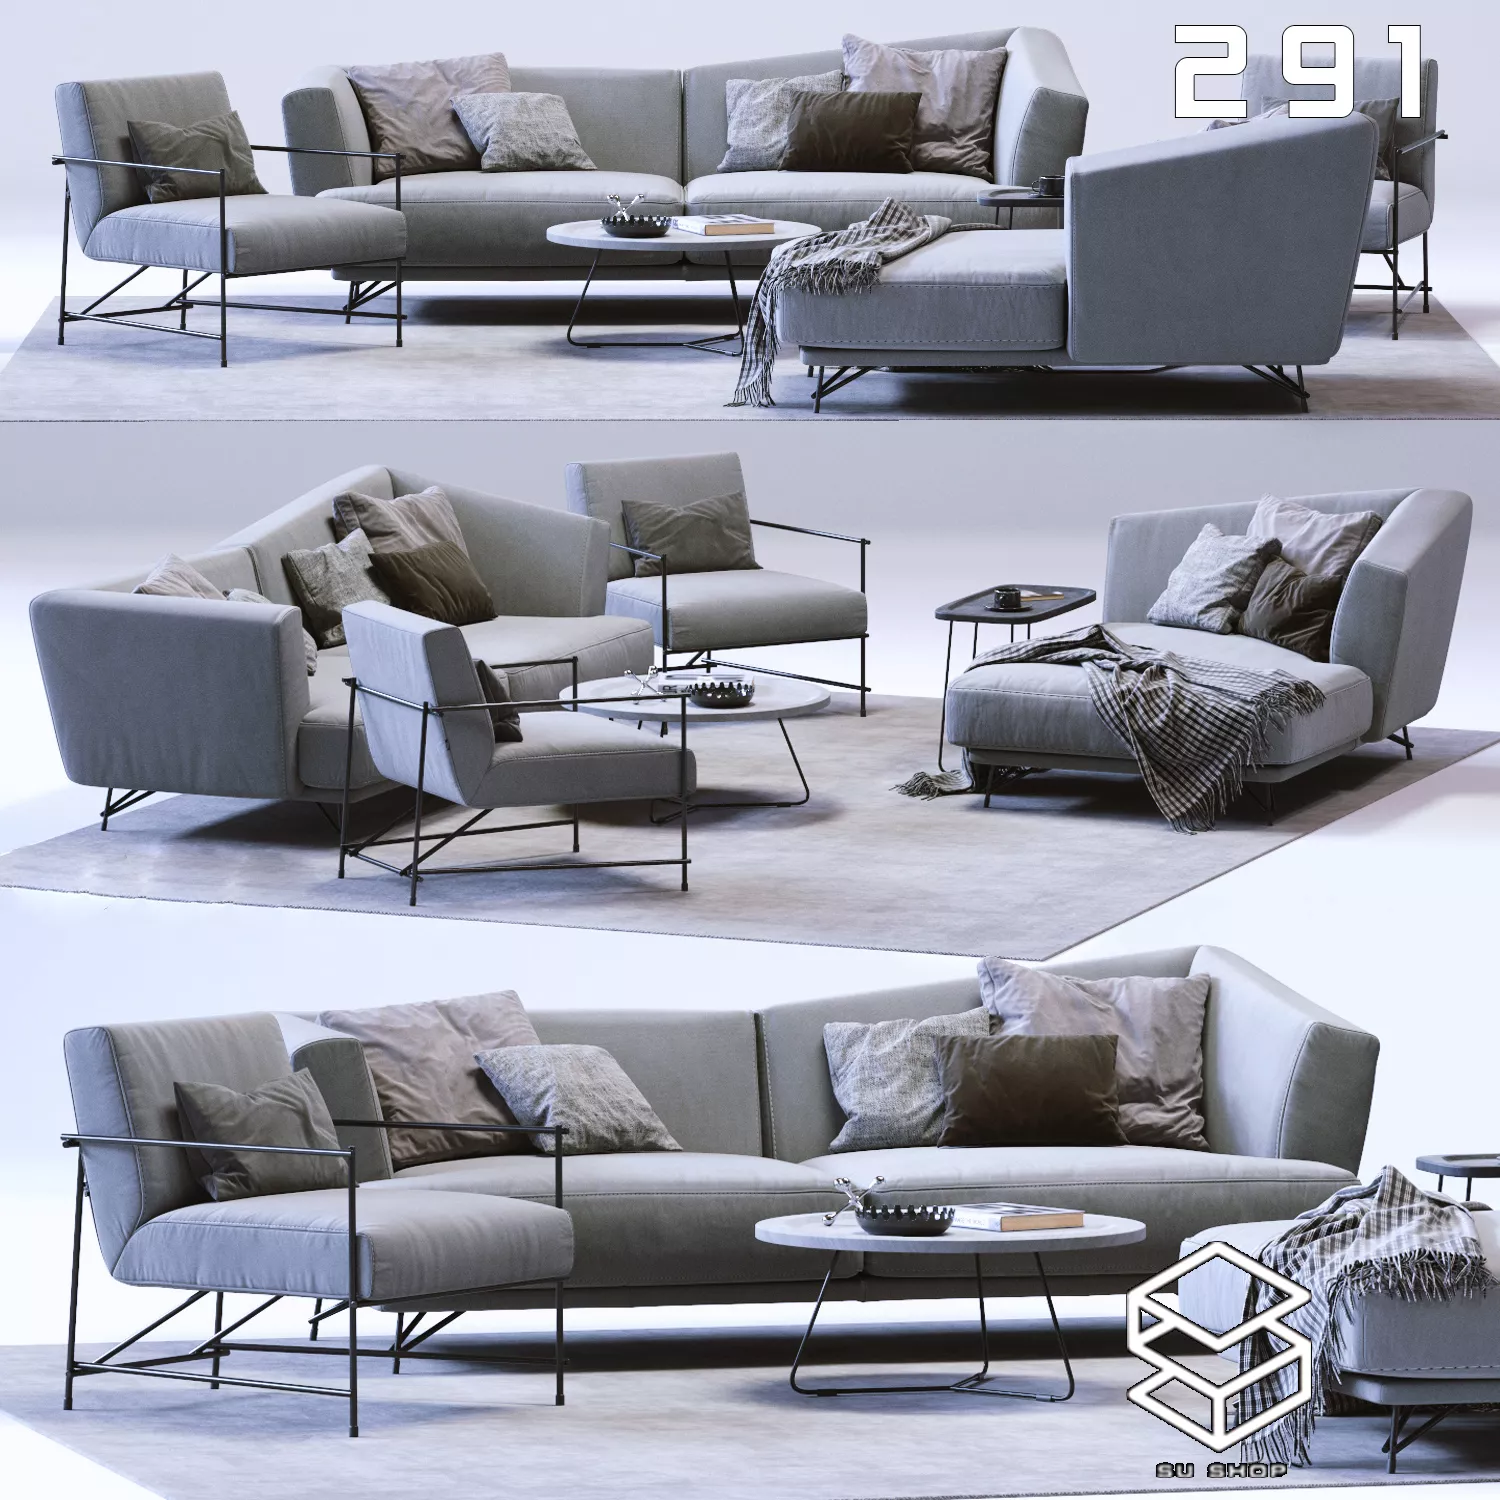 MODERN SOFA - SKETCHUP 3D MODEL - VRAY OR ENSCAPE - ID13598